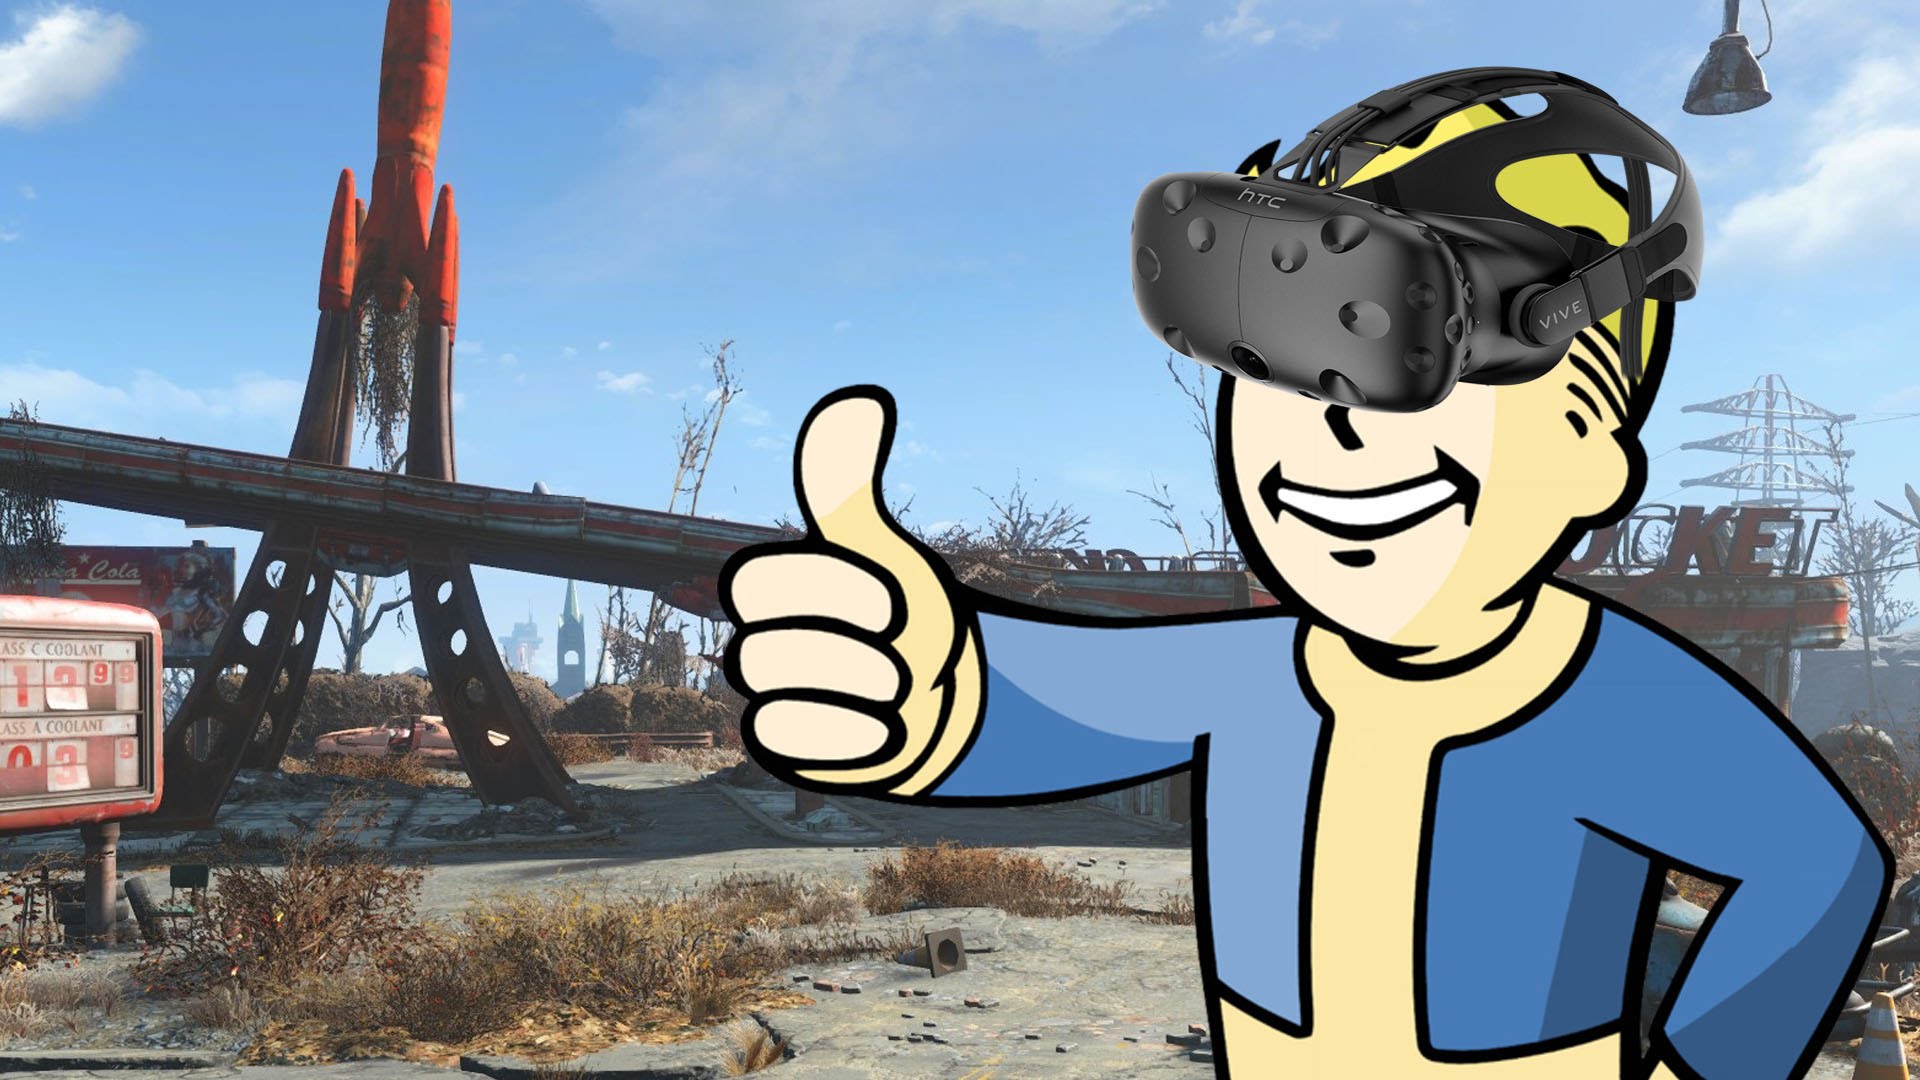 fallout-4-vr